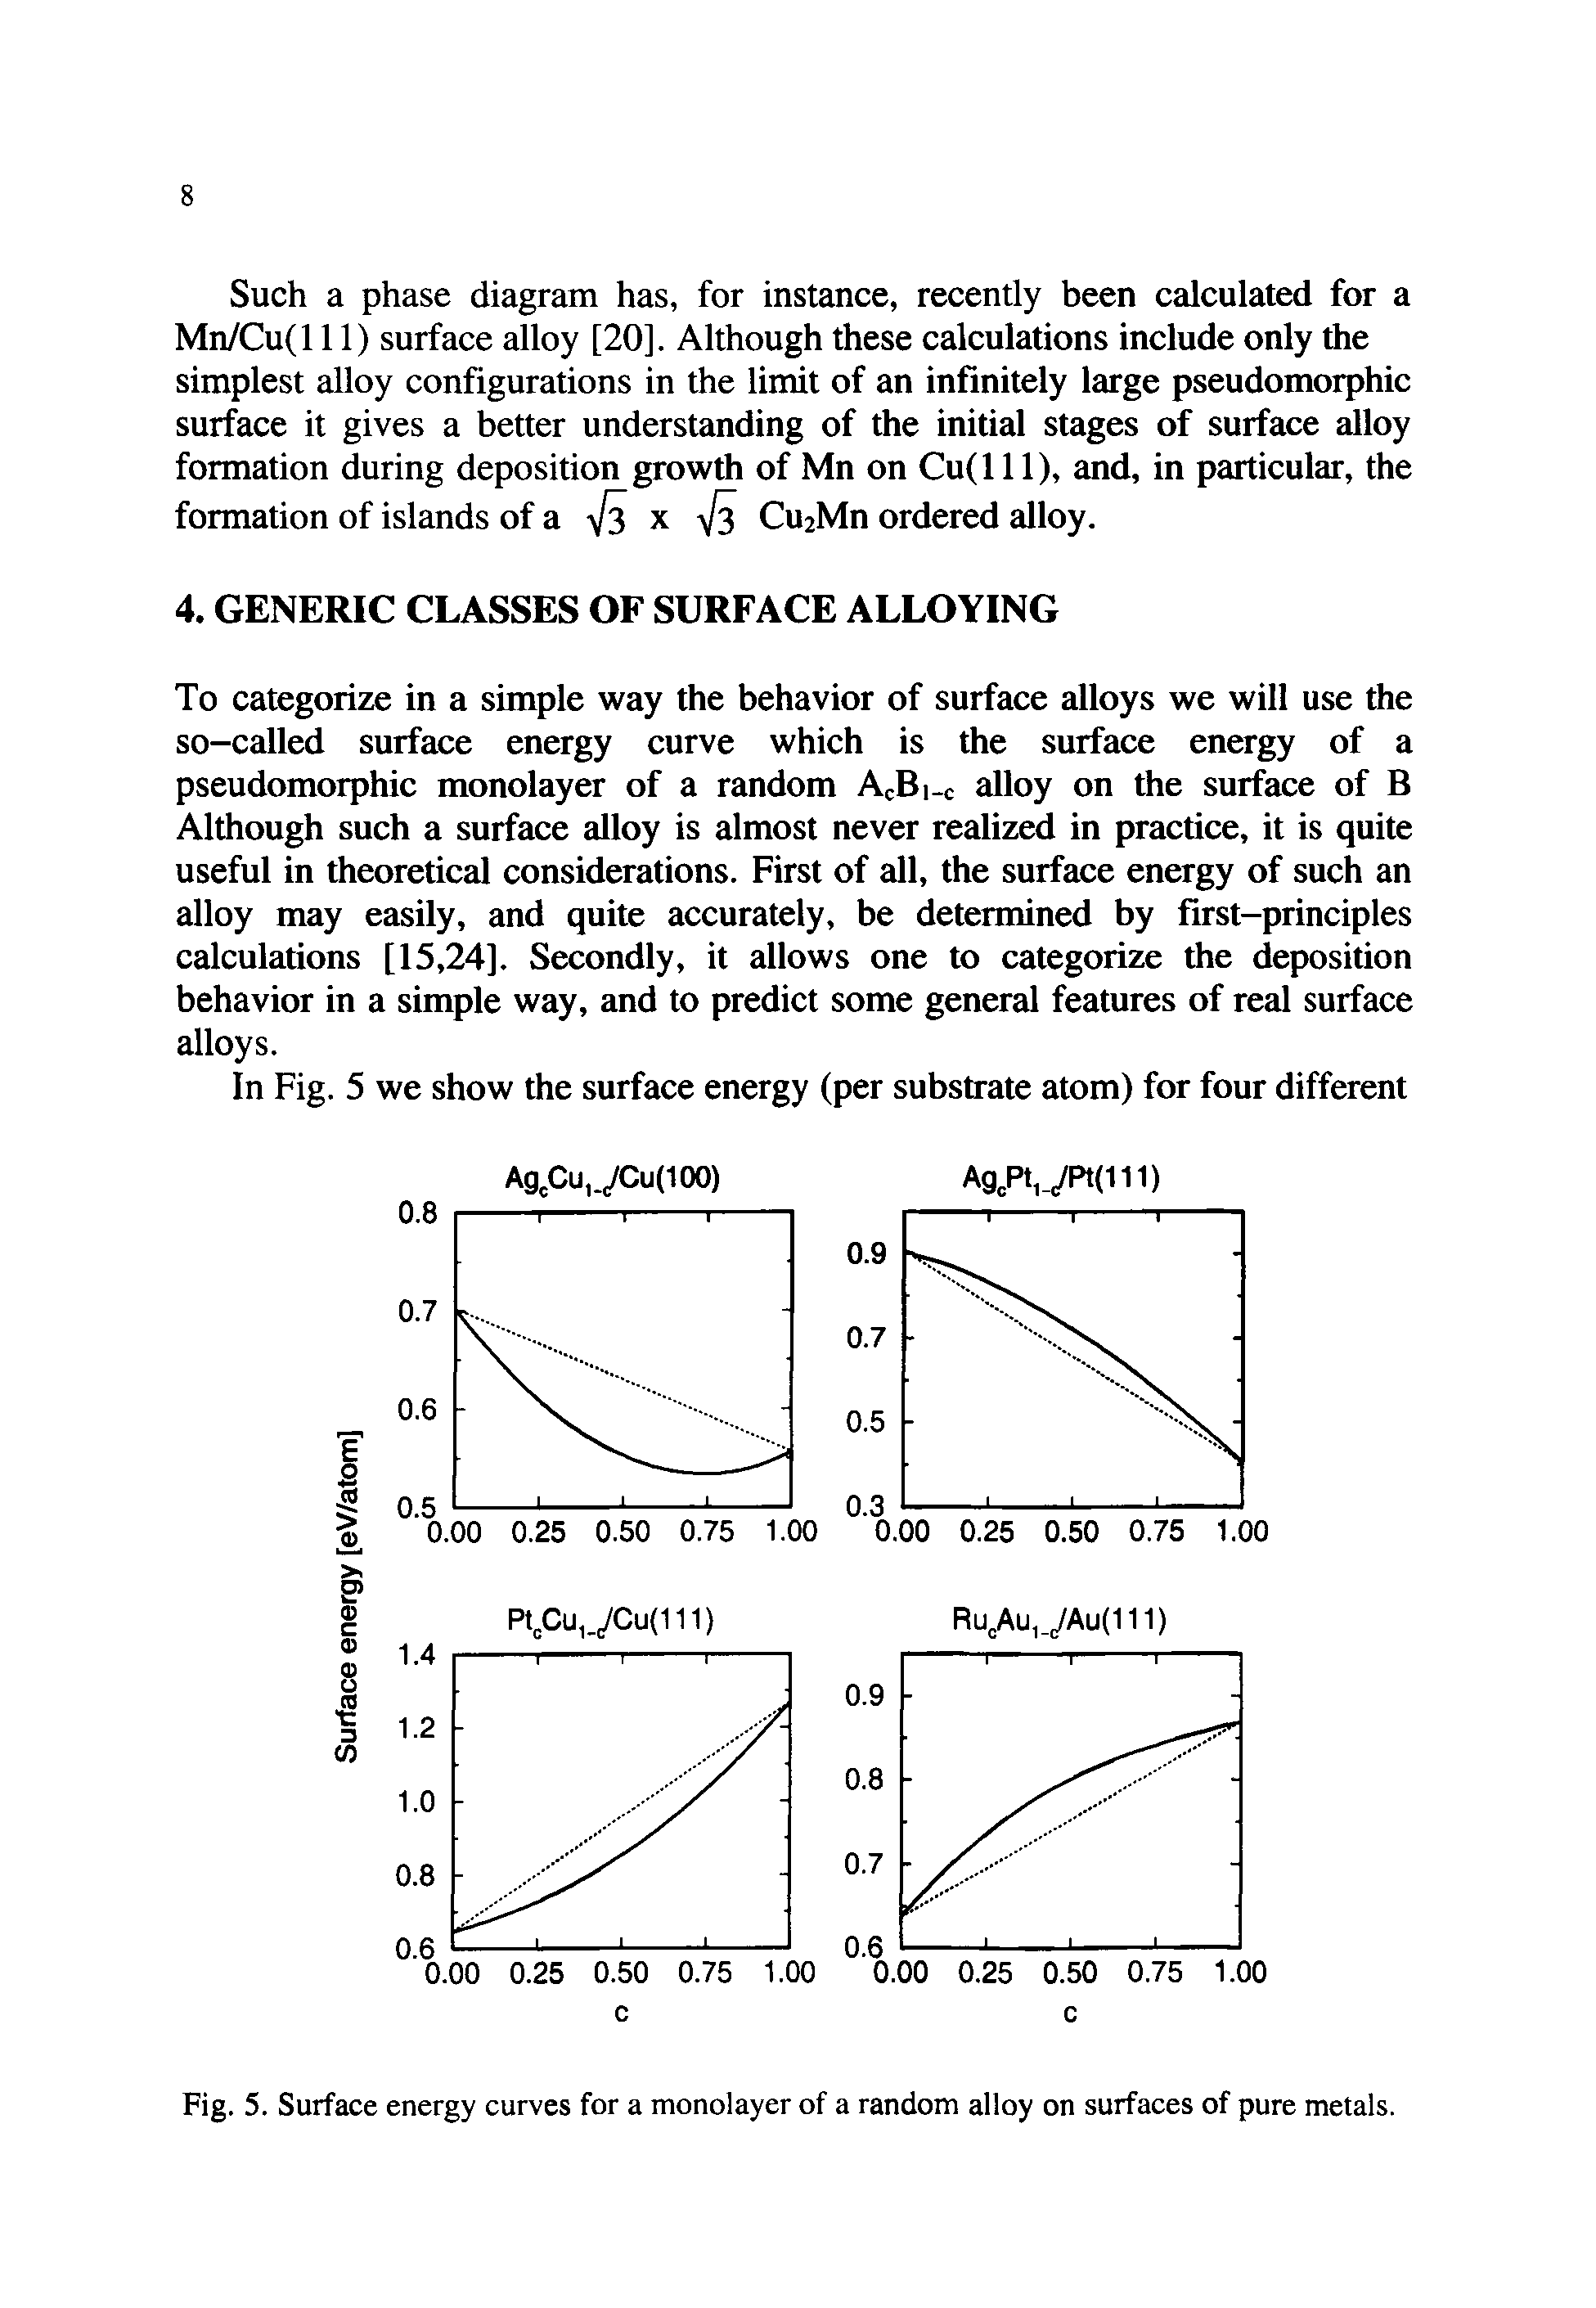 Fig. 5. Surface energy curves for a monolayer of a random alloy on surfaces of pure metals.